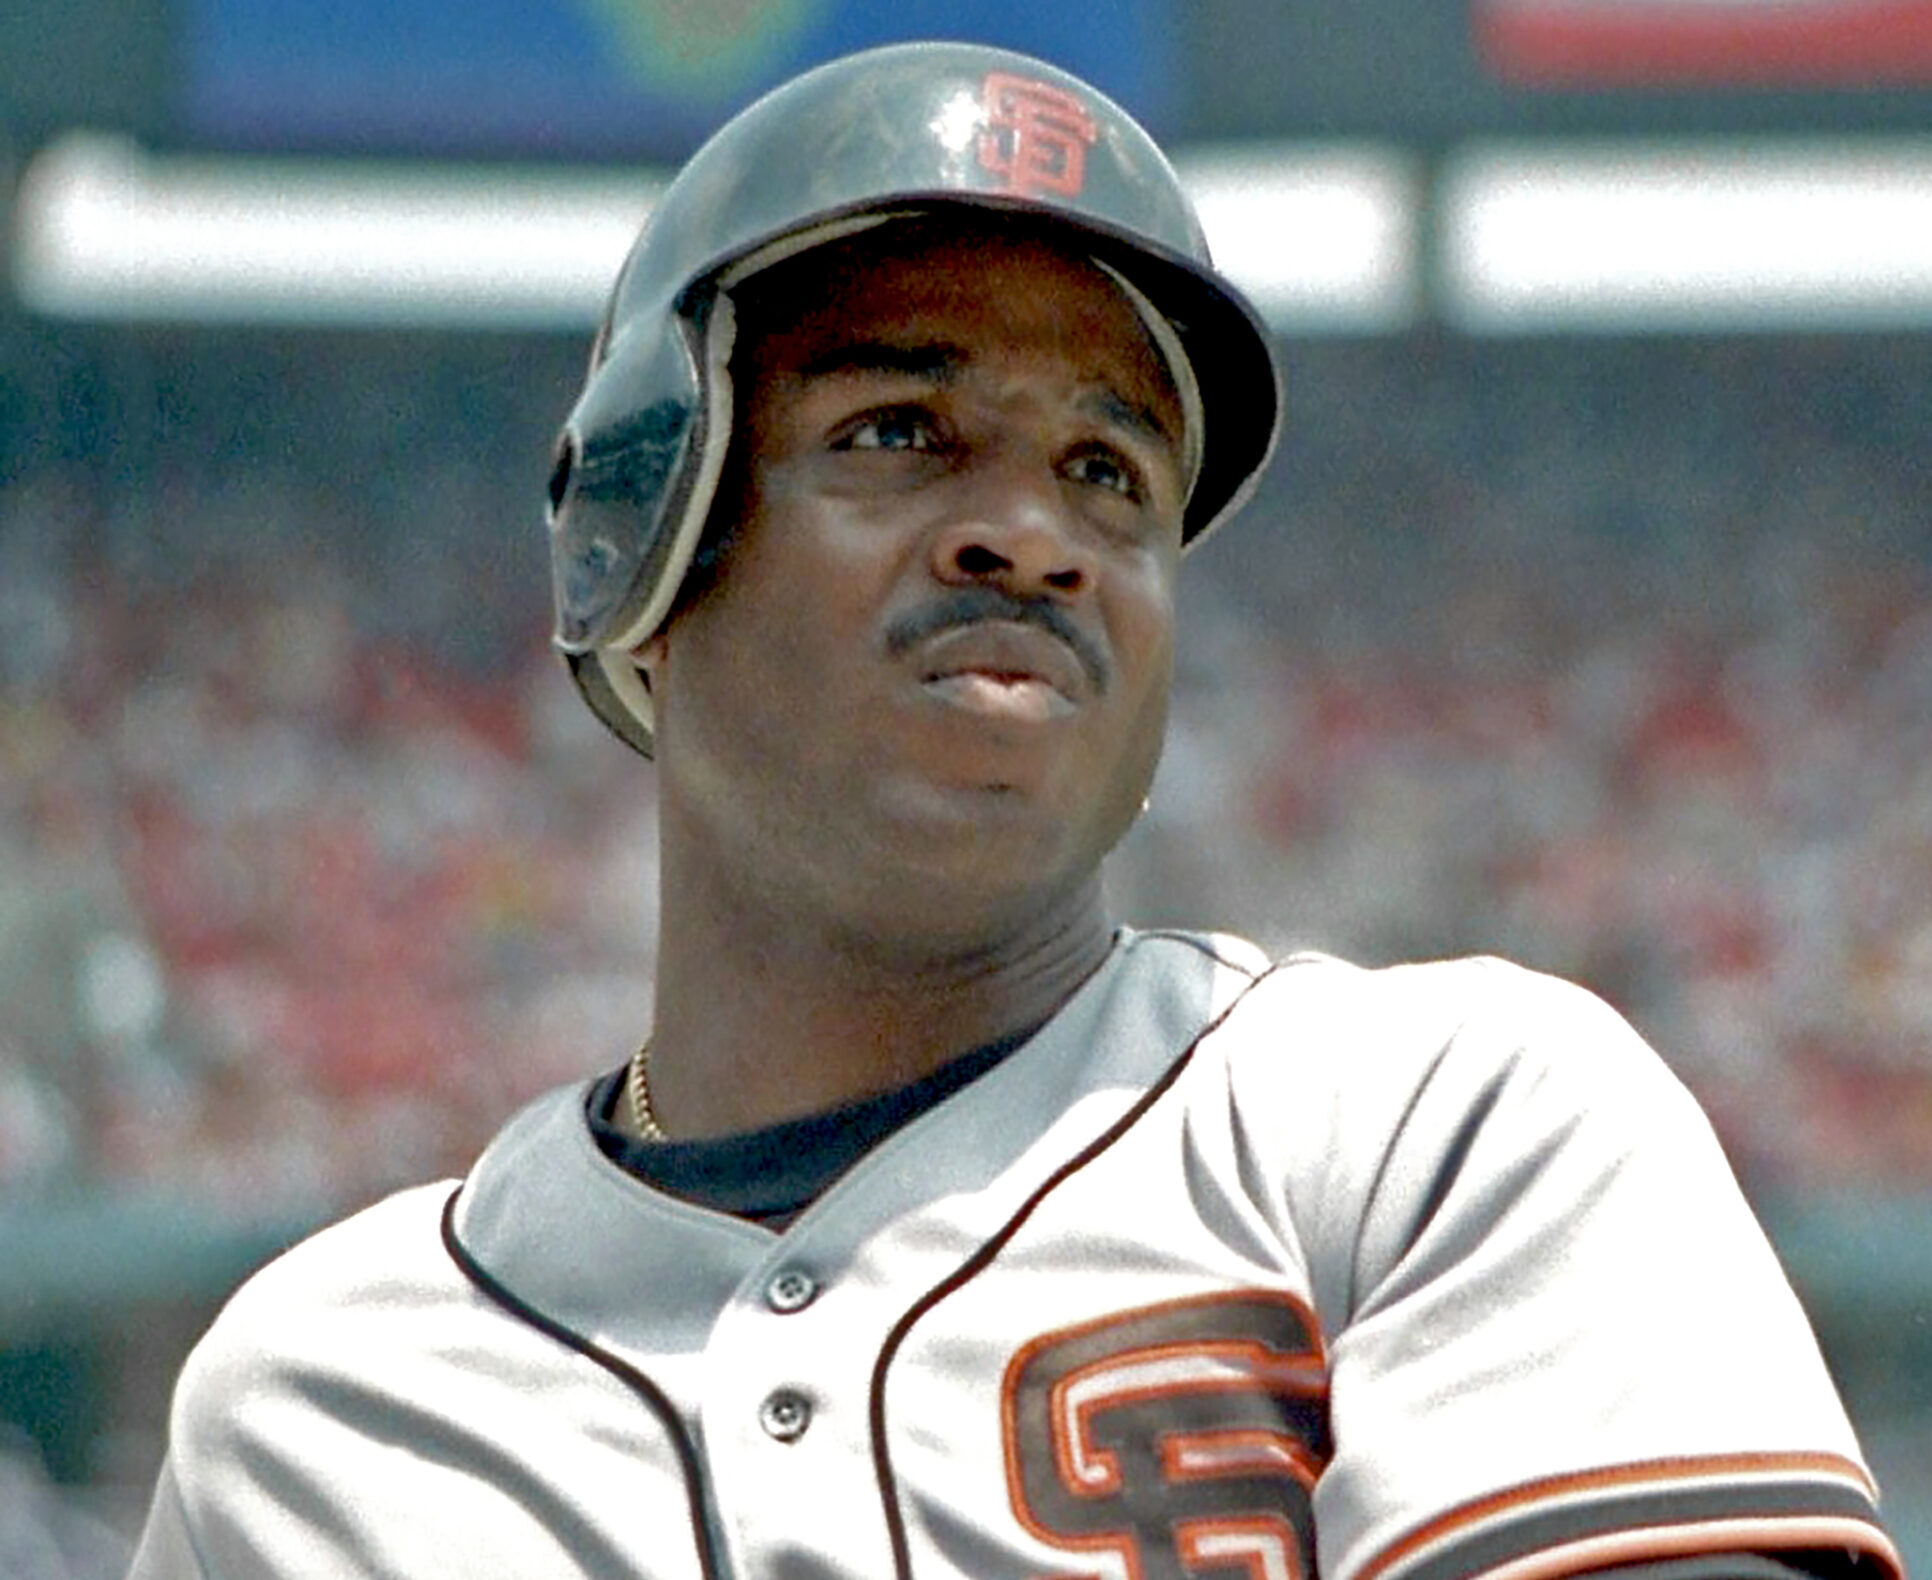 Barry Bonds pictured with the San Francisco Giants in 1993. Photo credit: Barry Bonds, Jim Accordino